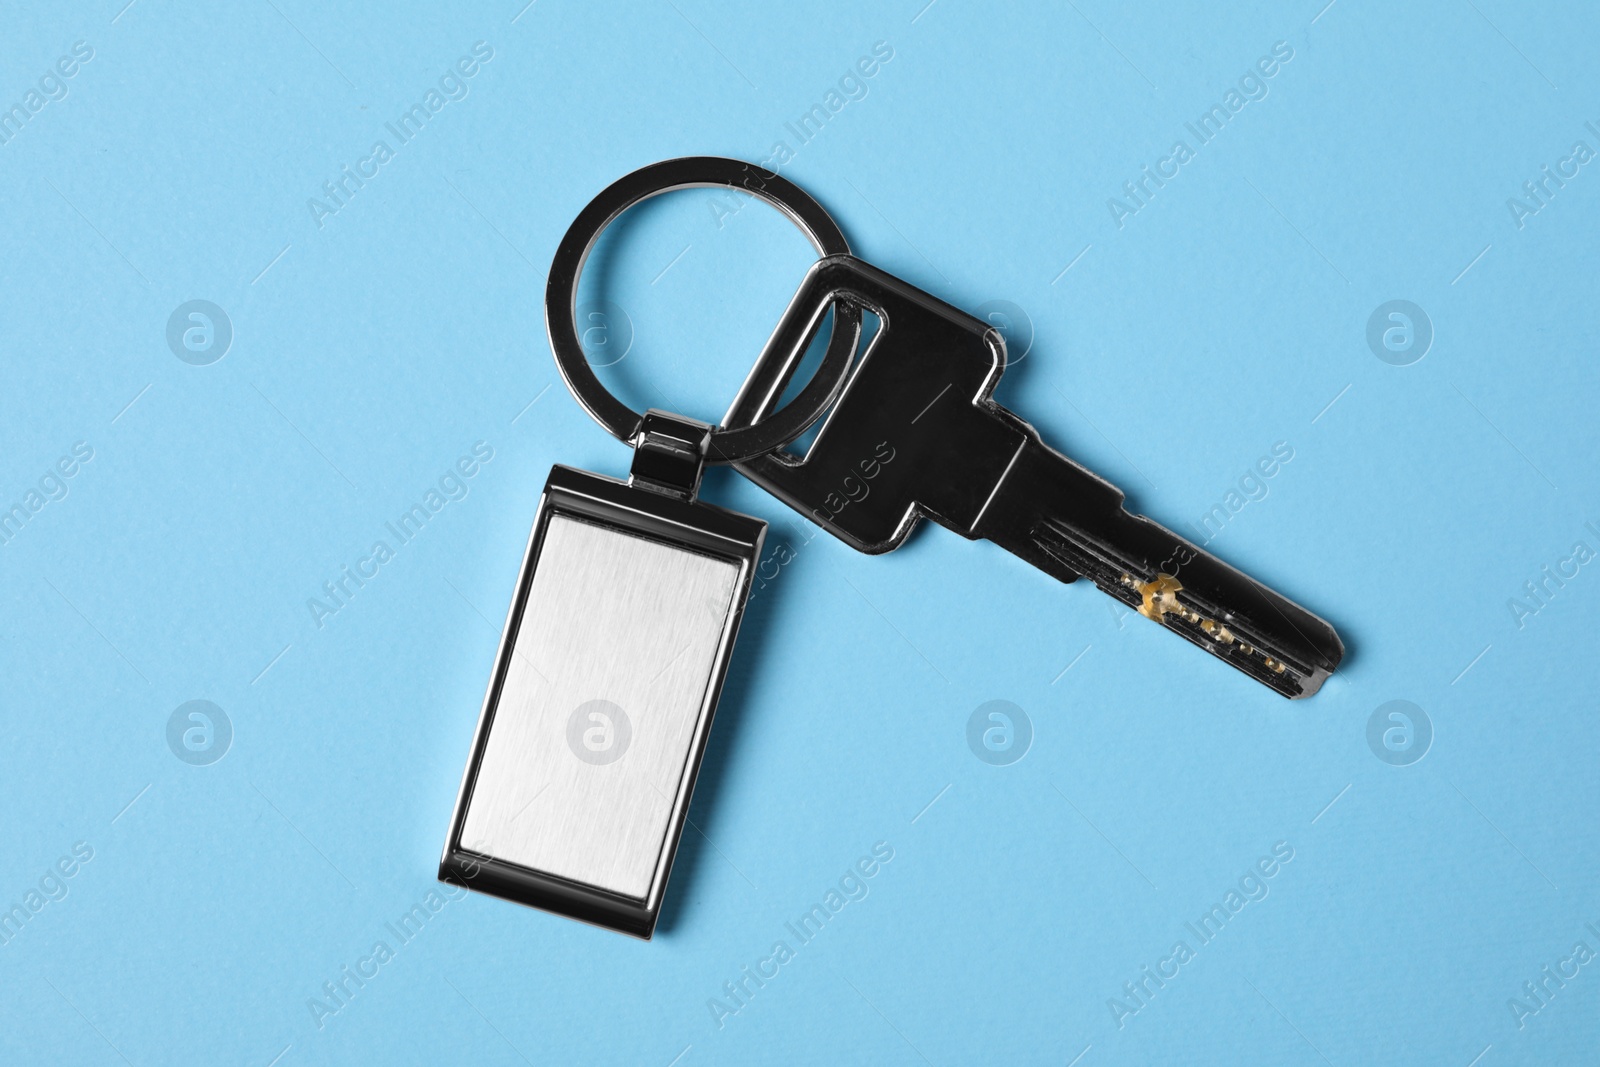 Photo of Key with metallic keychain on light blue background, top view